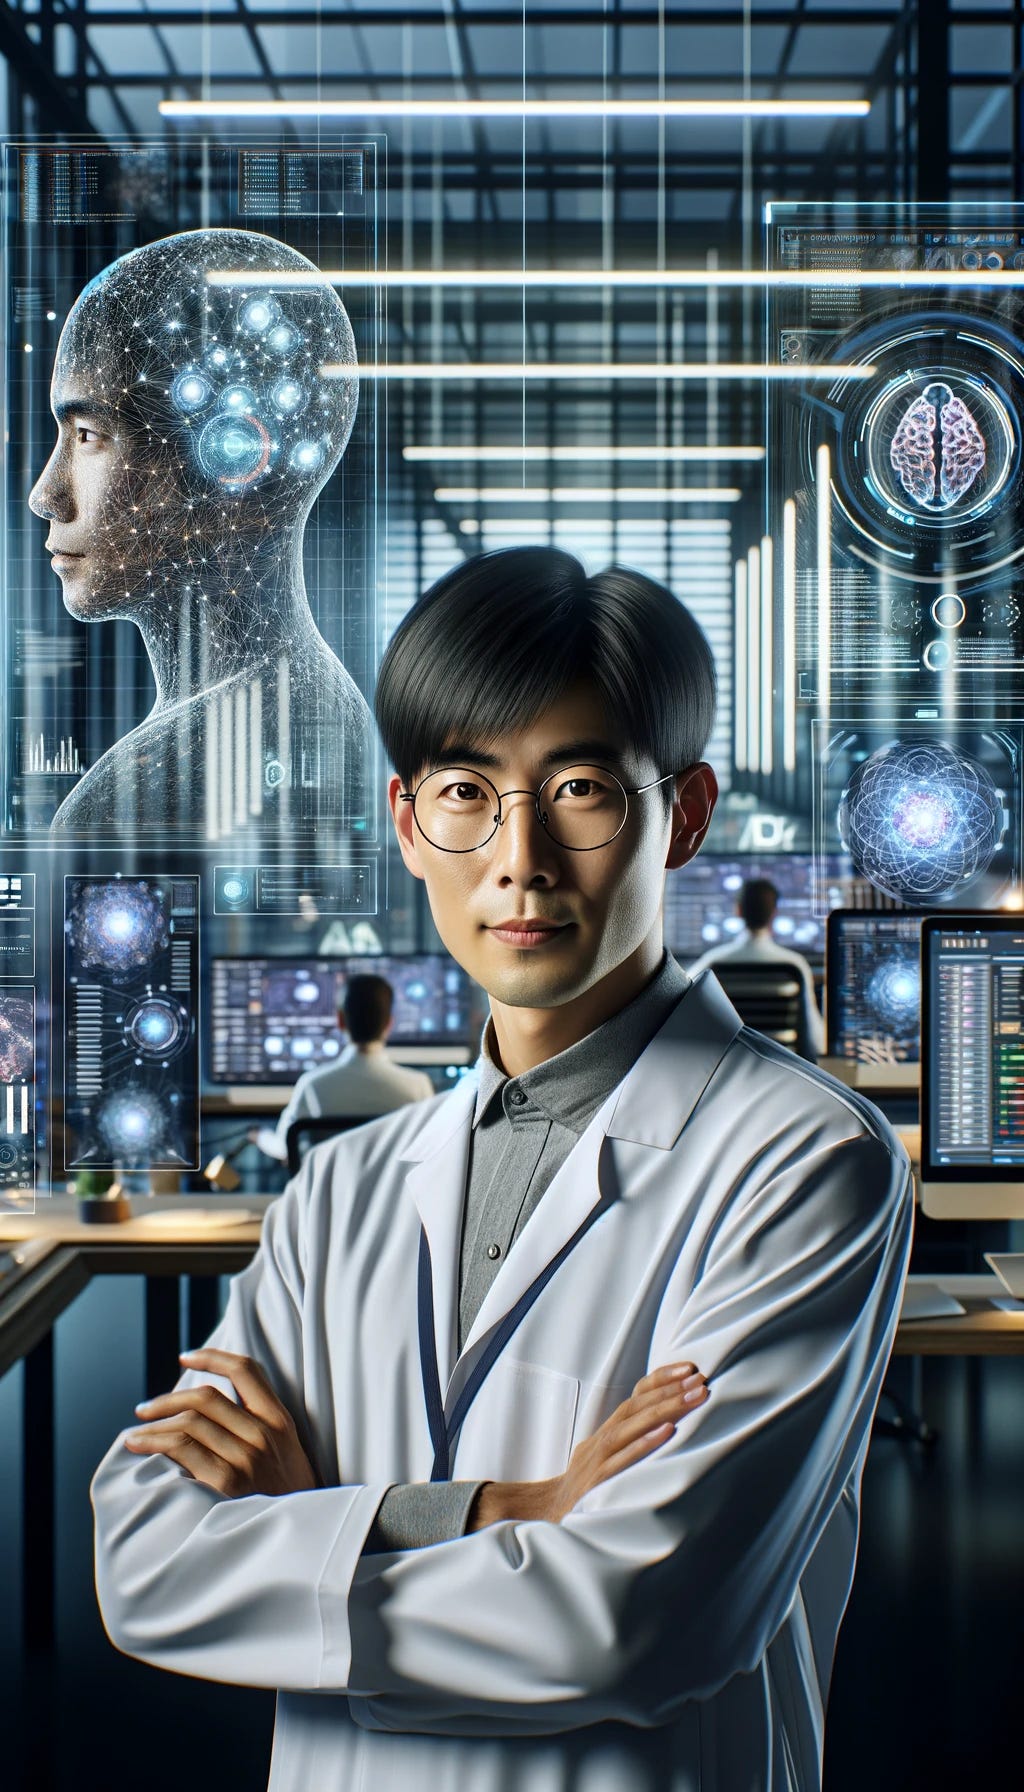 Portrait of an Asian AI Psychologist in a futuristic setting. The AI Psychologist, shown in a modern, high-tech office, has an attentive and focused expression, indicative of deep engagement in analyzing and optimizing AI behavior. The background features advanced computers and holographic displays illustrating complex neural networks and AI data analytics. Surrounding the psychologist are interactive 3D models of AI brains and screens displaying AI diagnostics and psychological patterns. This portrait embodies the fusion of cutting-edge technology and human insight in the field of AI psychology.